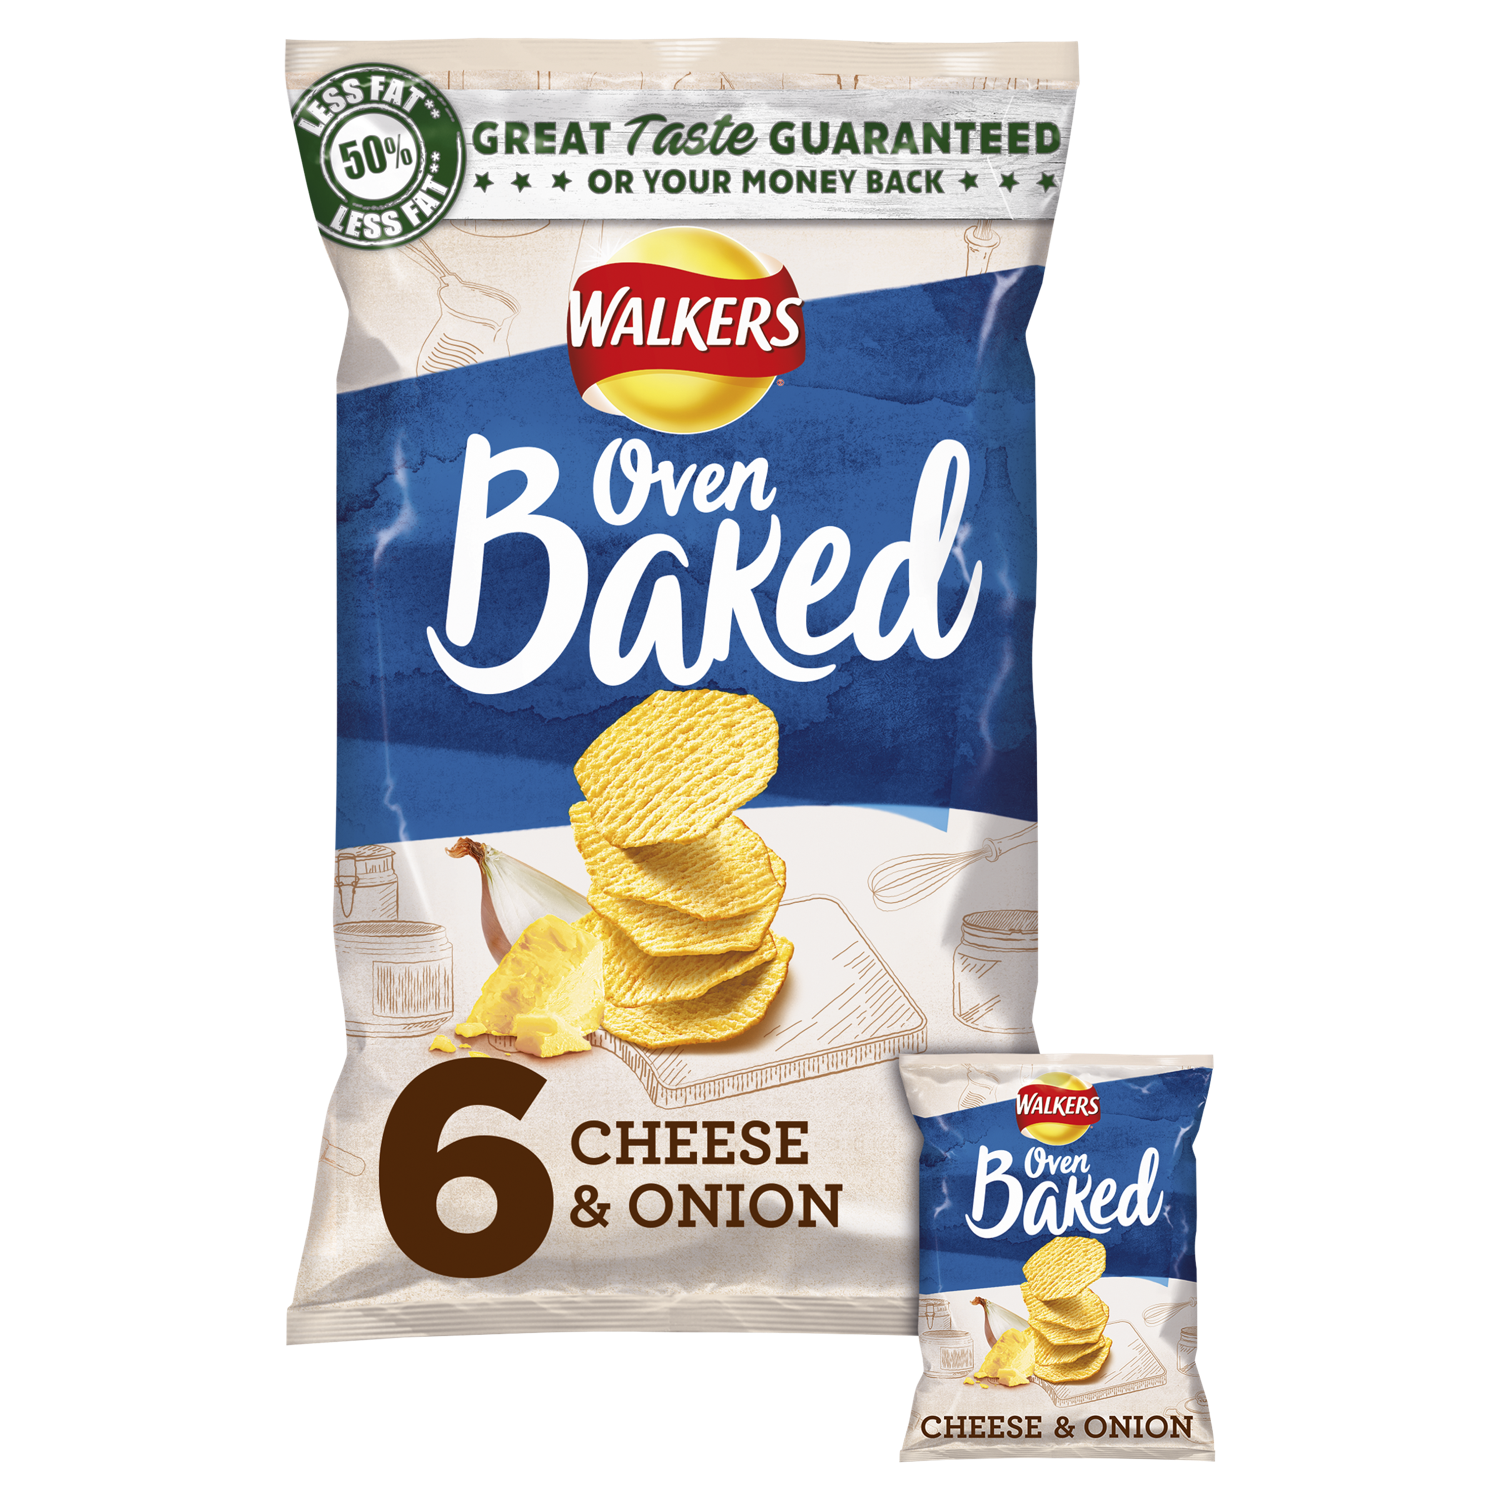 Walkers Baked Cheese & Onion 6-Pack / 18 x 6 x 25g